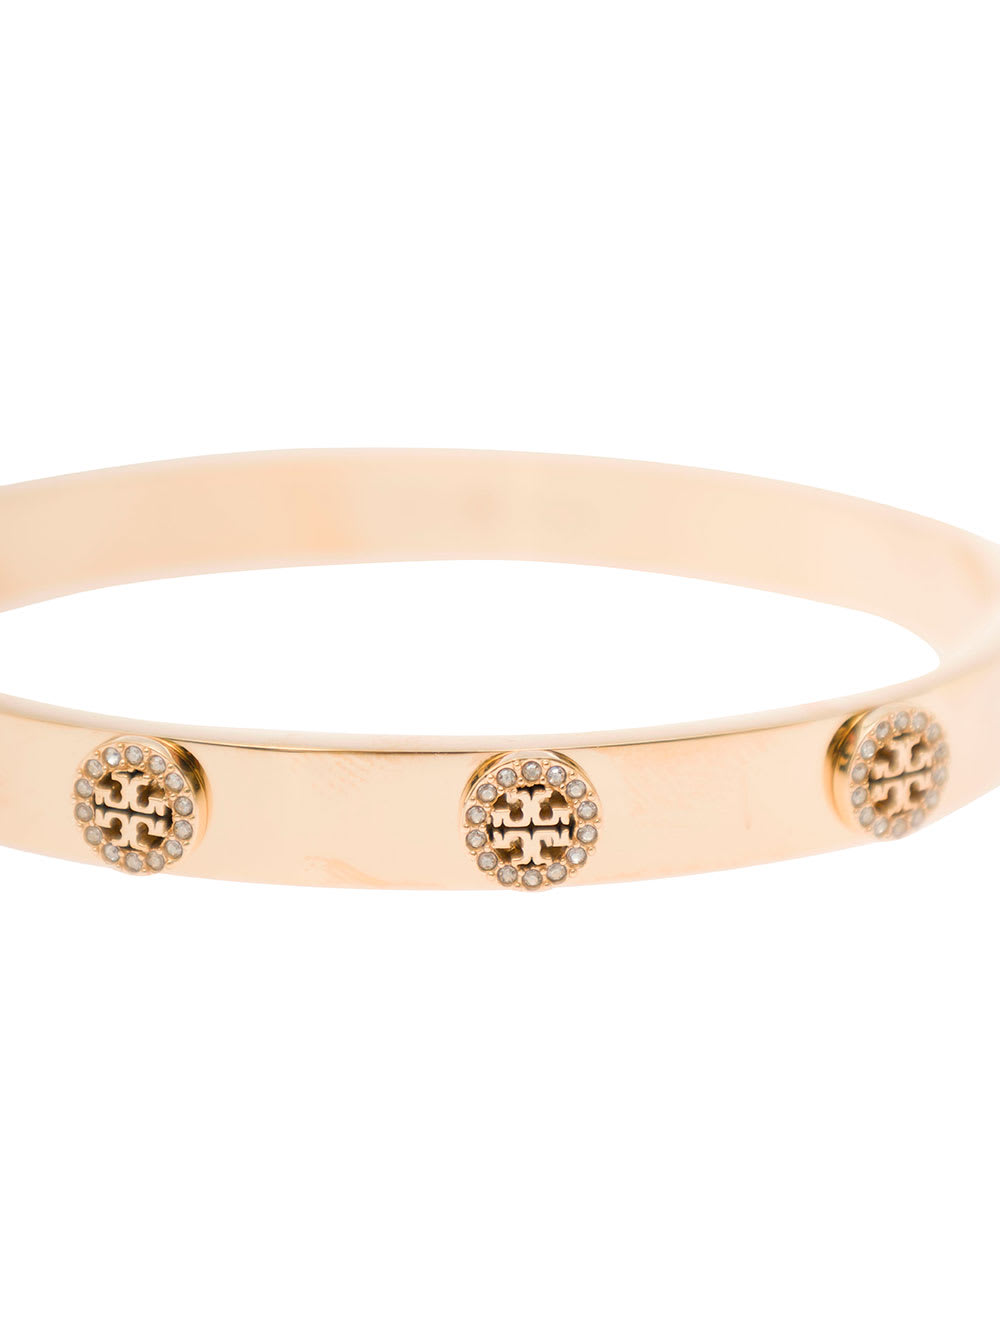 Shop Tory Burch Gold Tone Bracelet With Logo Studs In Stainless Steel And Cubic Zirconia Woman In Metallic